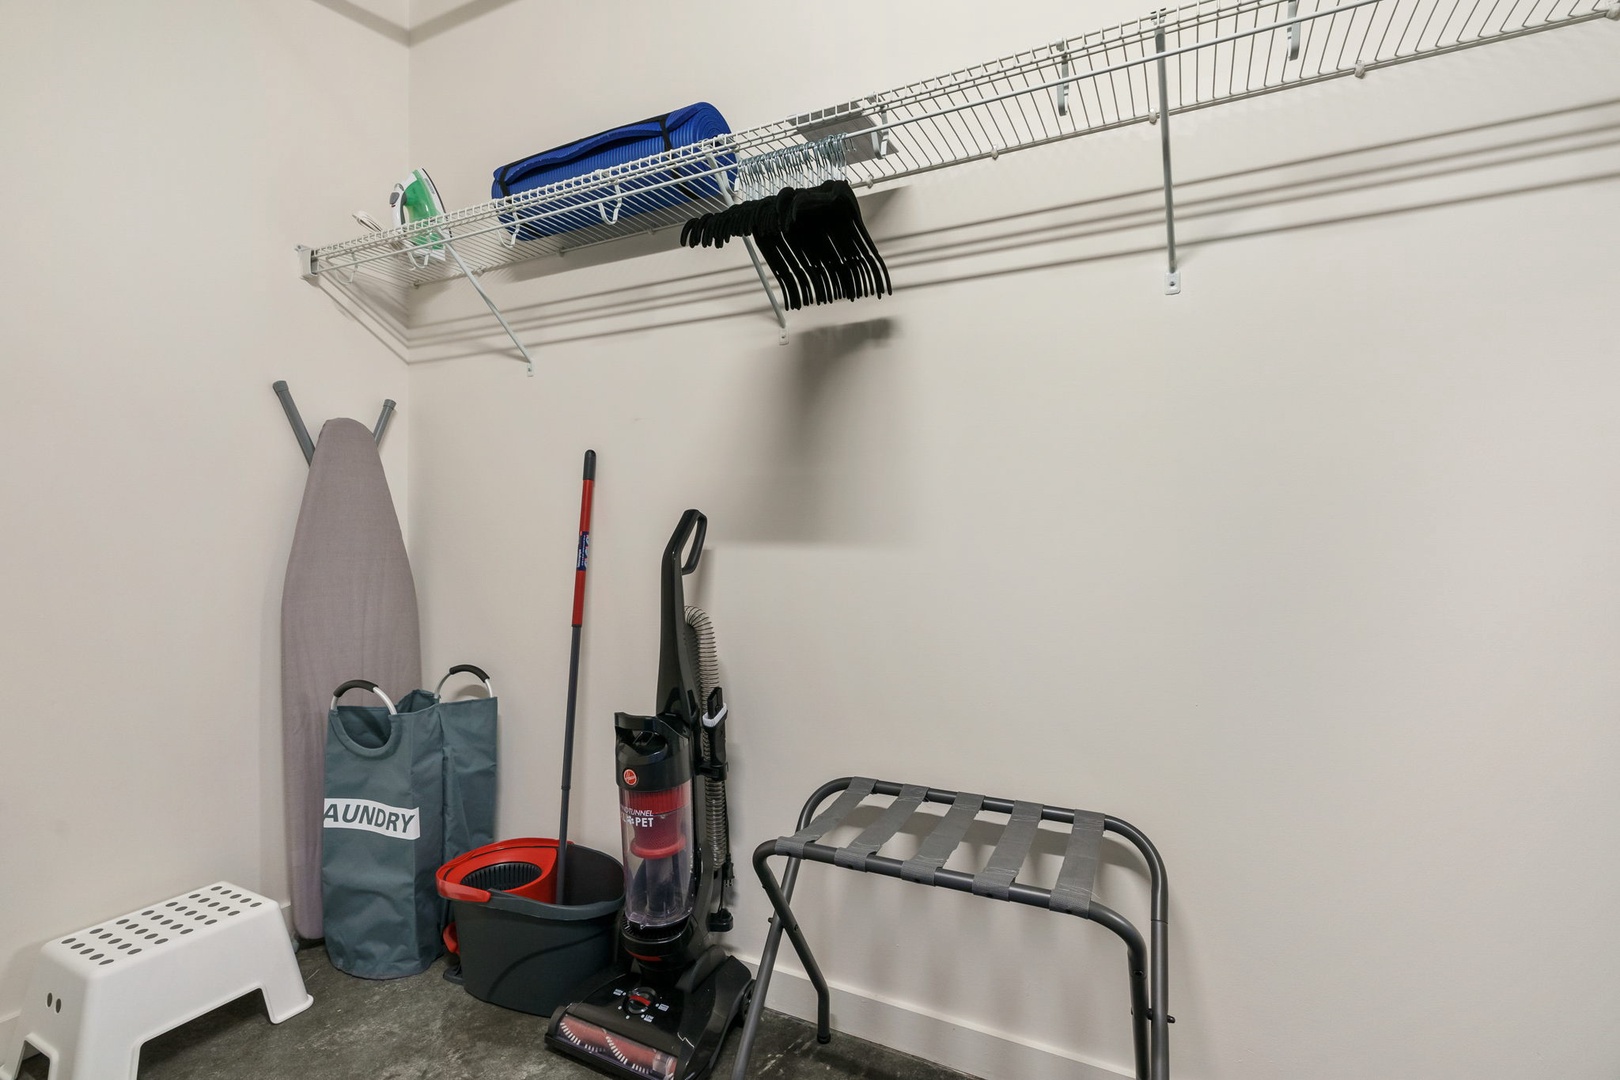 Get comfortable and stay organized with the spacious walk-in closet.